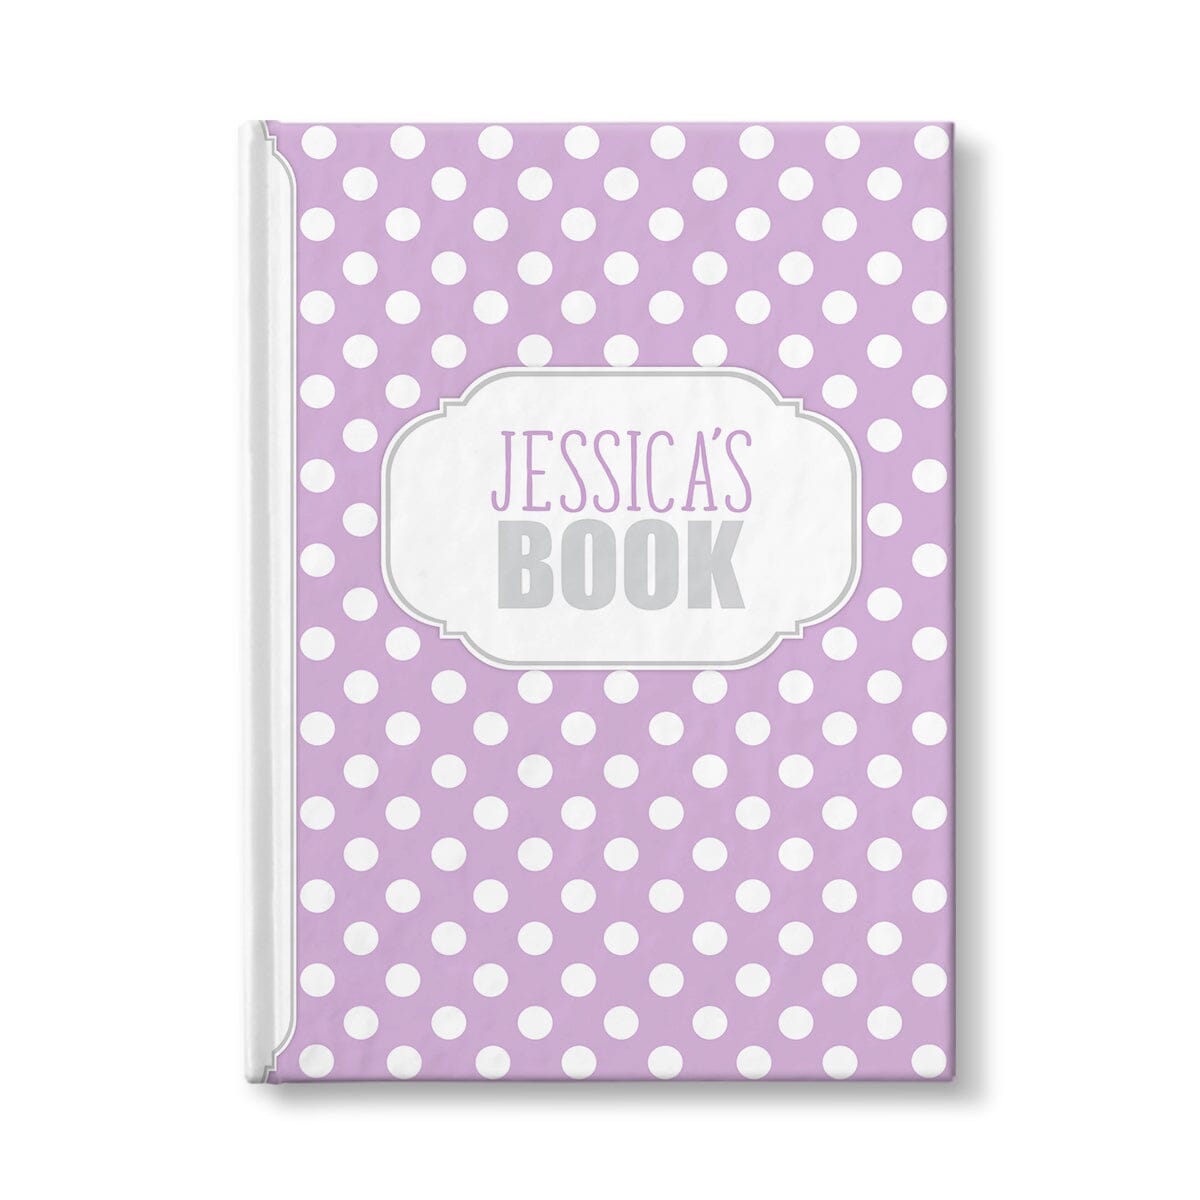 Personalized Purple Polka Dot Journal at Artistically Invited.